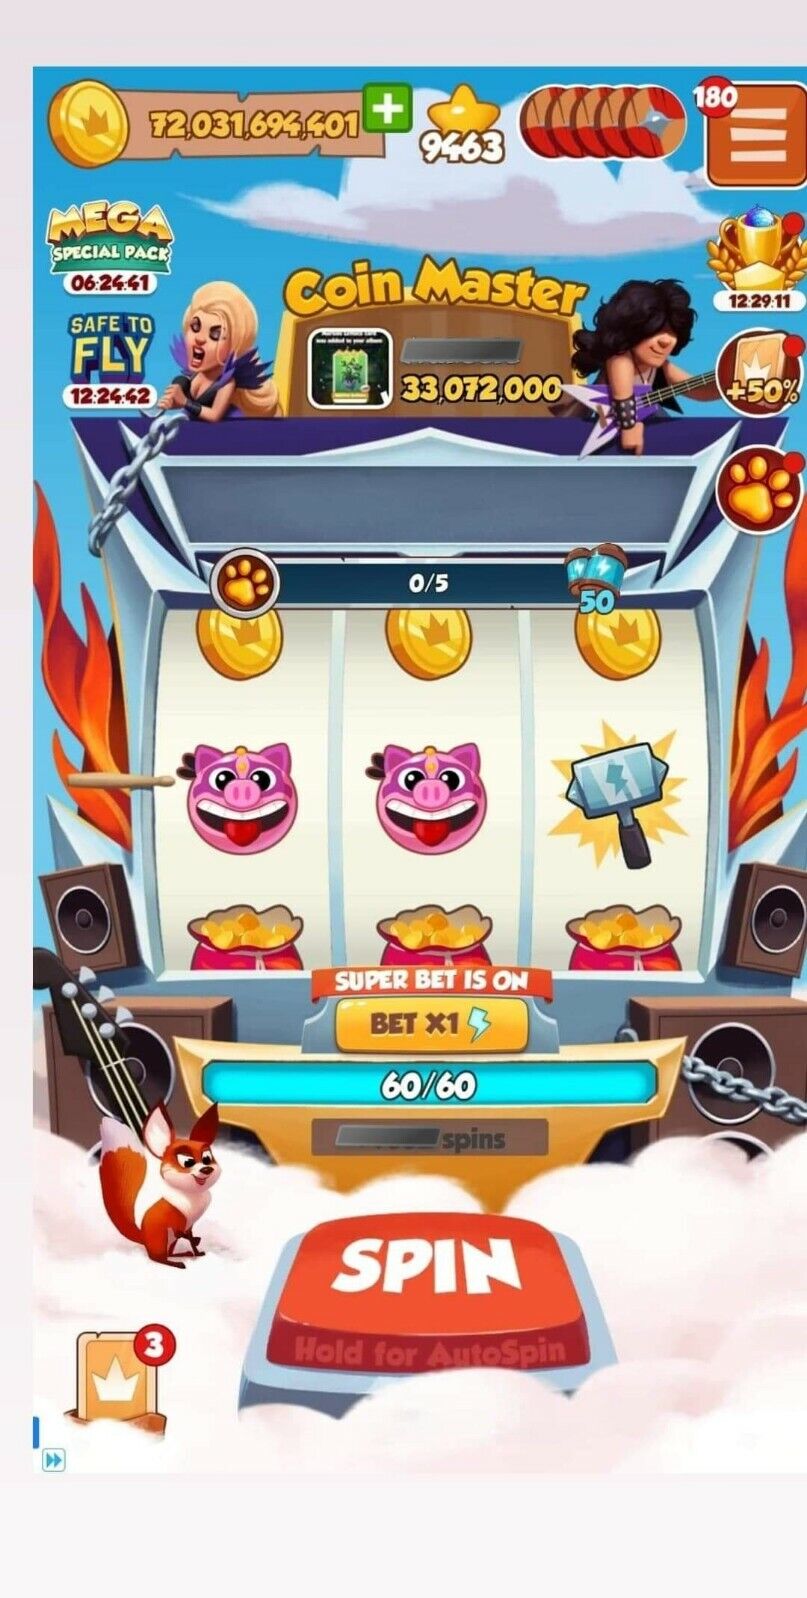 How to Get Infinite Spins in Coin Master? - Playbite